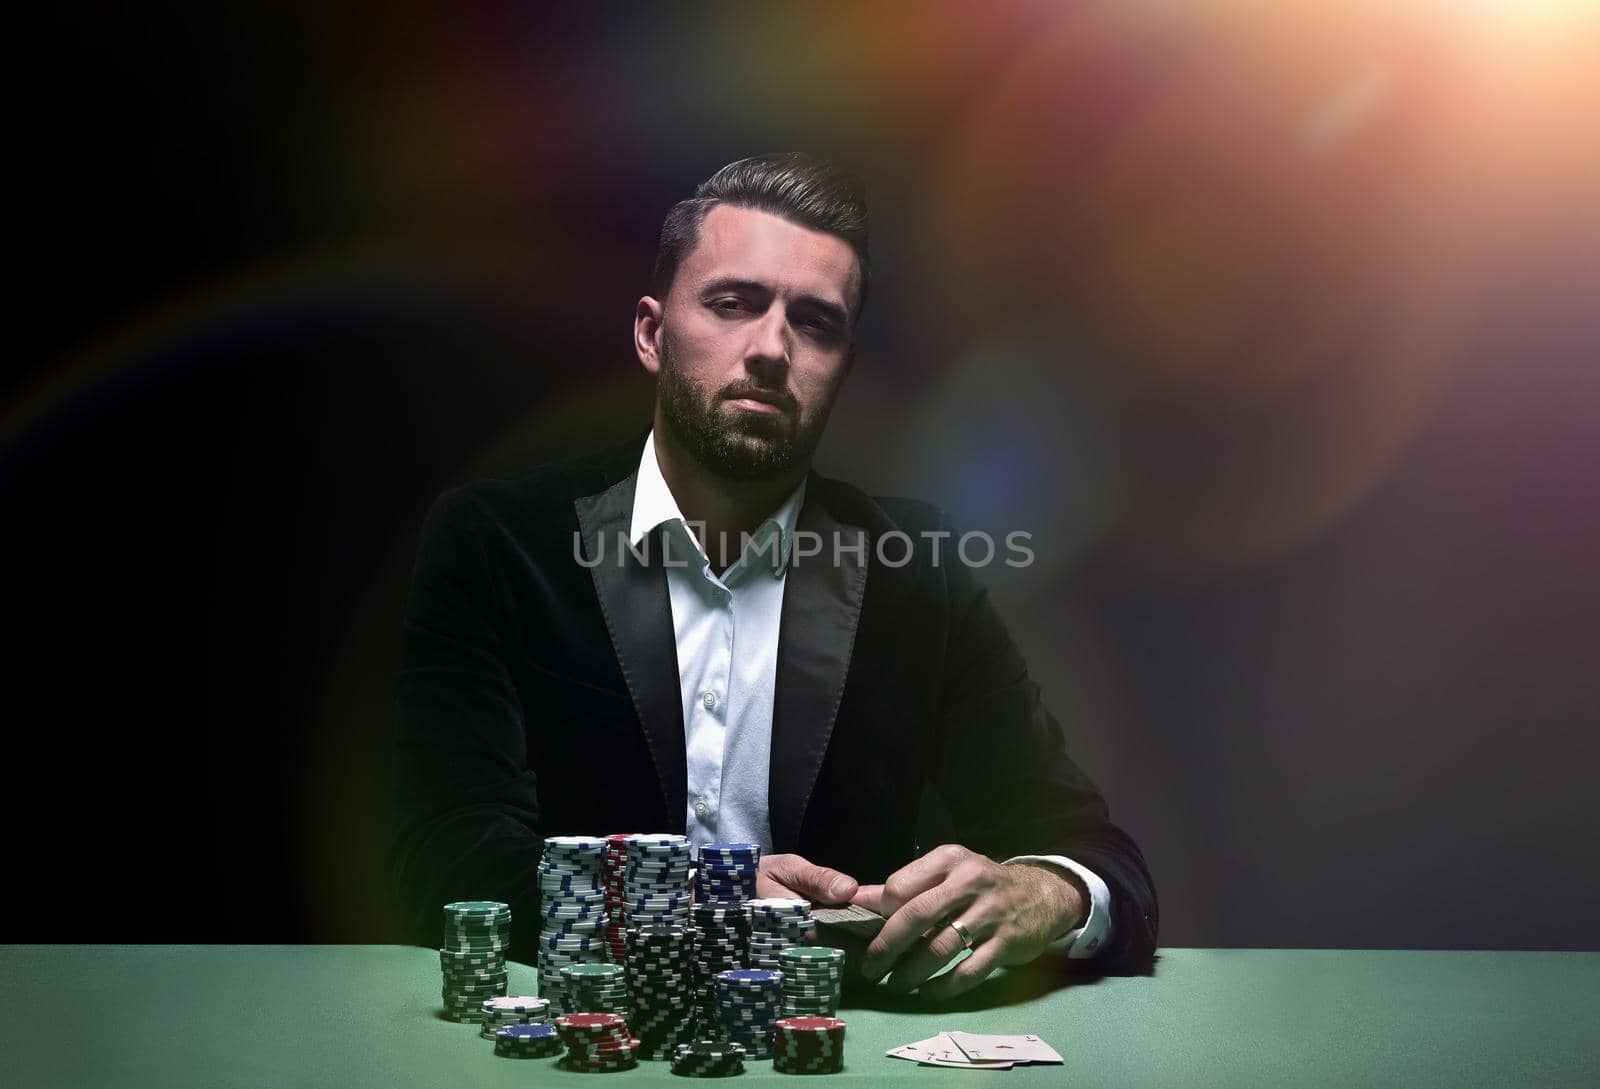 Young man sitting at the poker table with his chips and cards in front of him